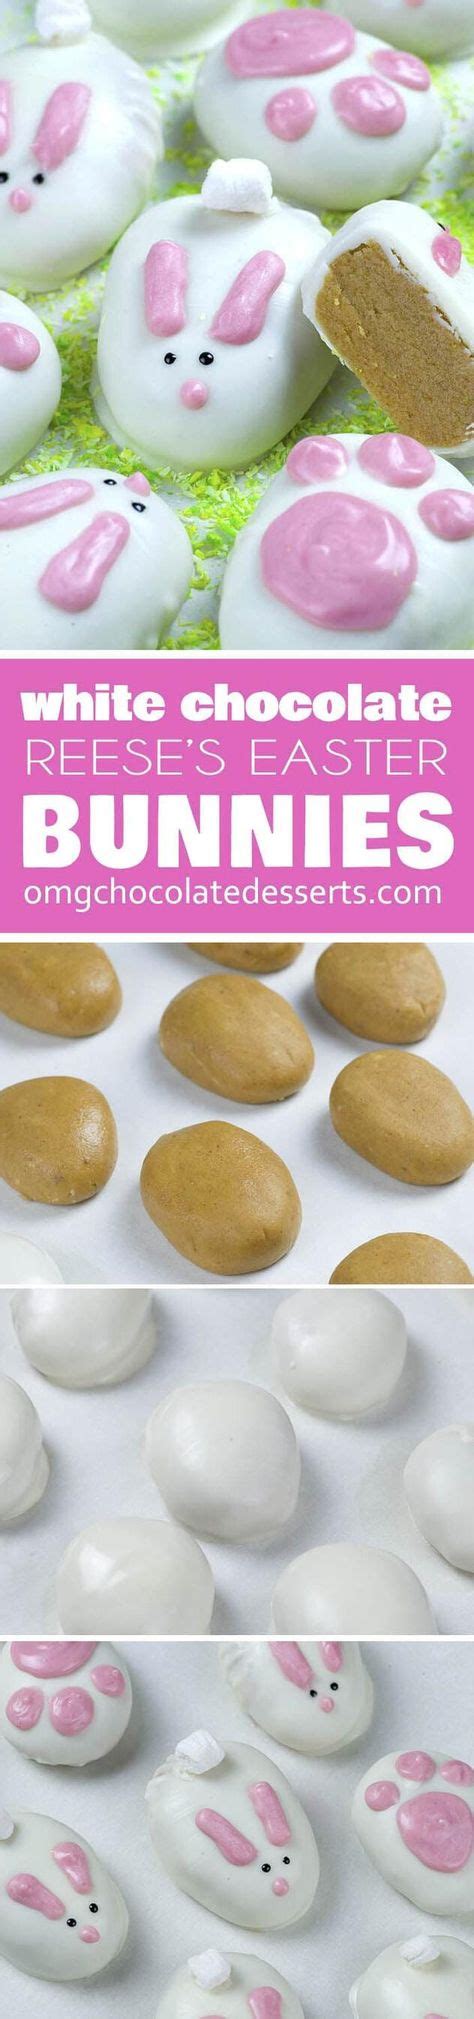 White Chocolate Easter Bunnies Recipe In 2020 Easy Easter Desserts